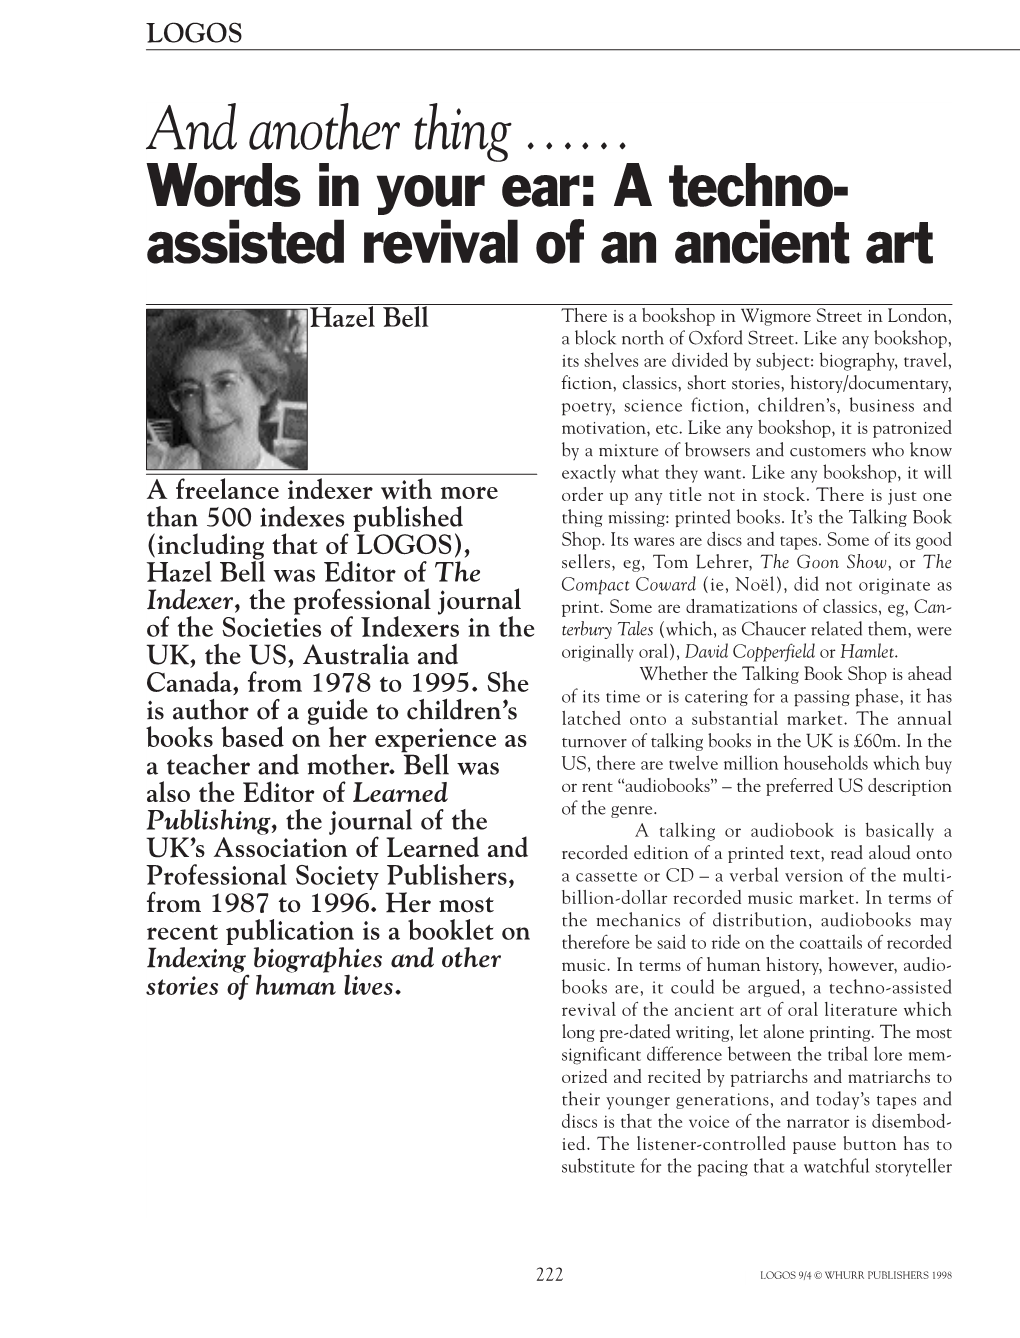 And Another Thing …… Words in Your Ear: a Techno- Assisted Revival of an Ancient Art